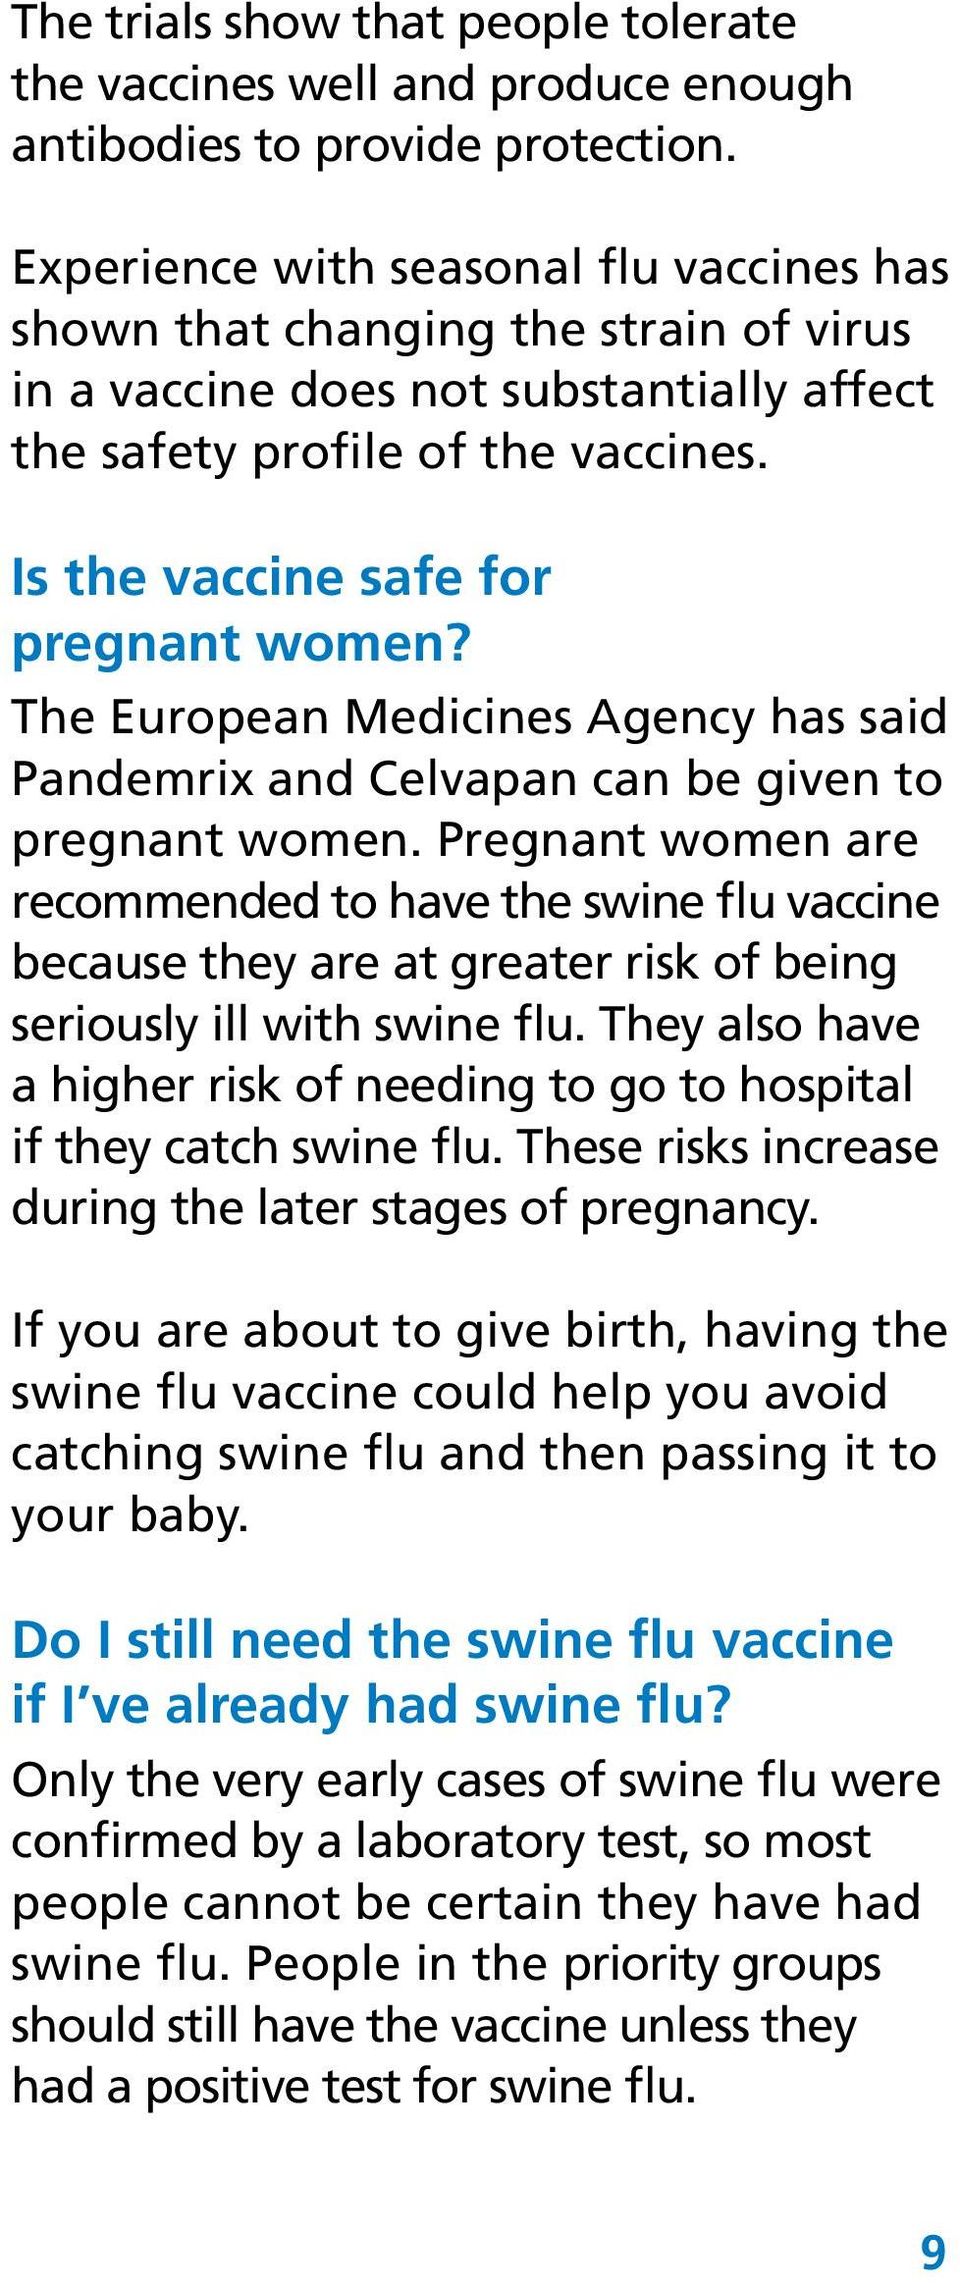 The European Medicines Agency has said Pandemrix and Celvapan can be given to pregnant women.